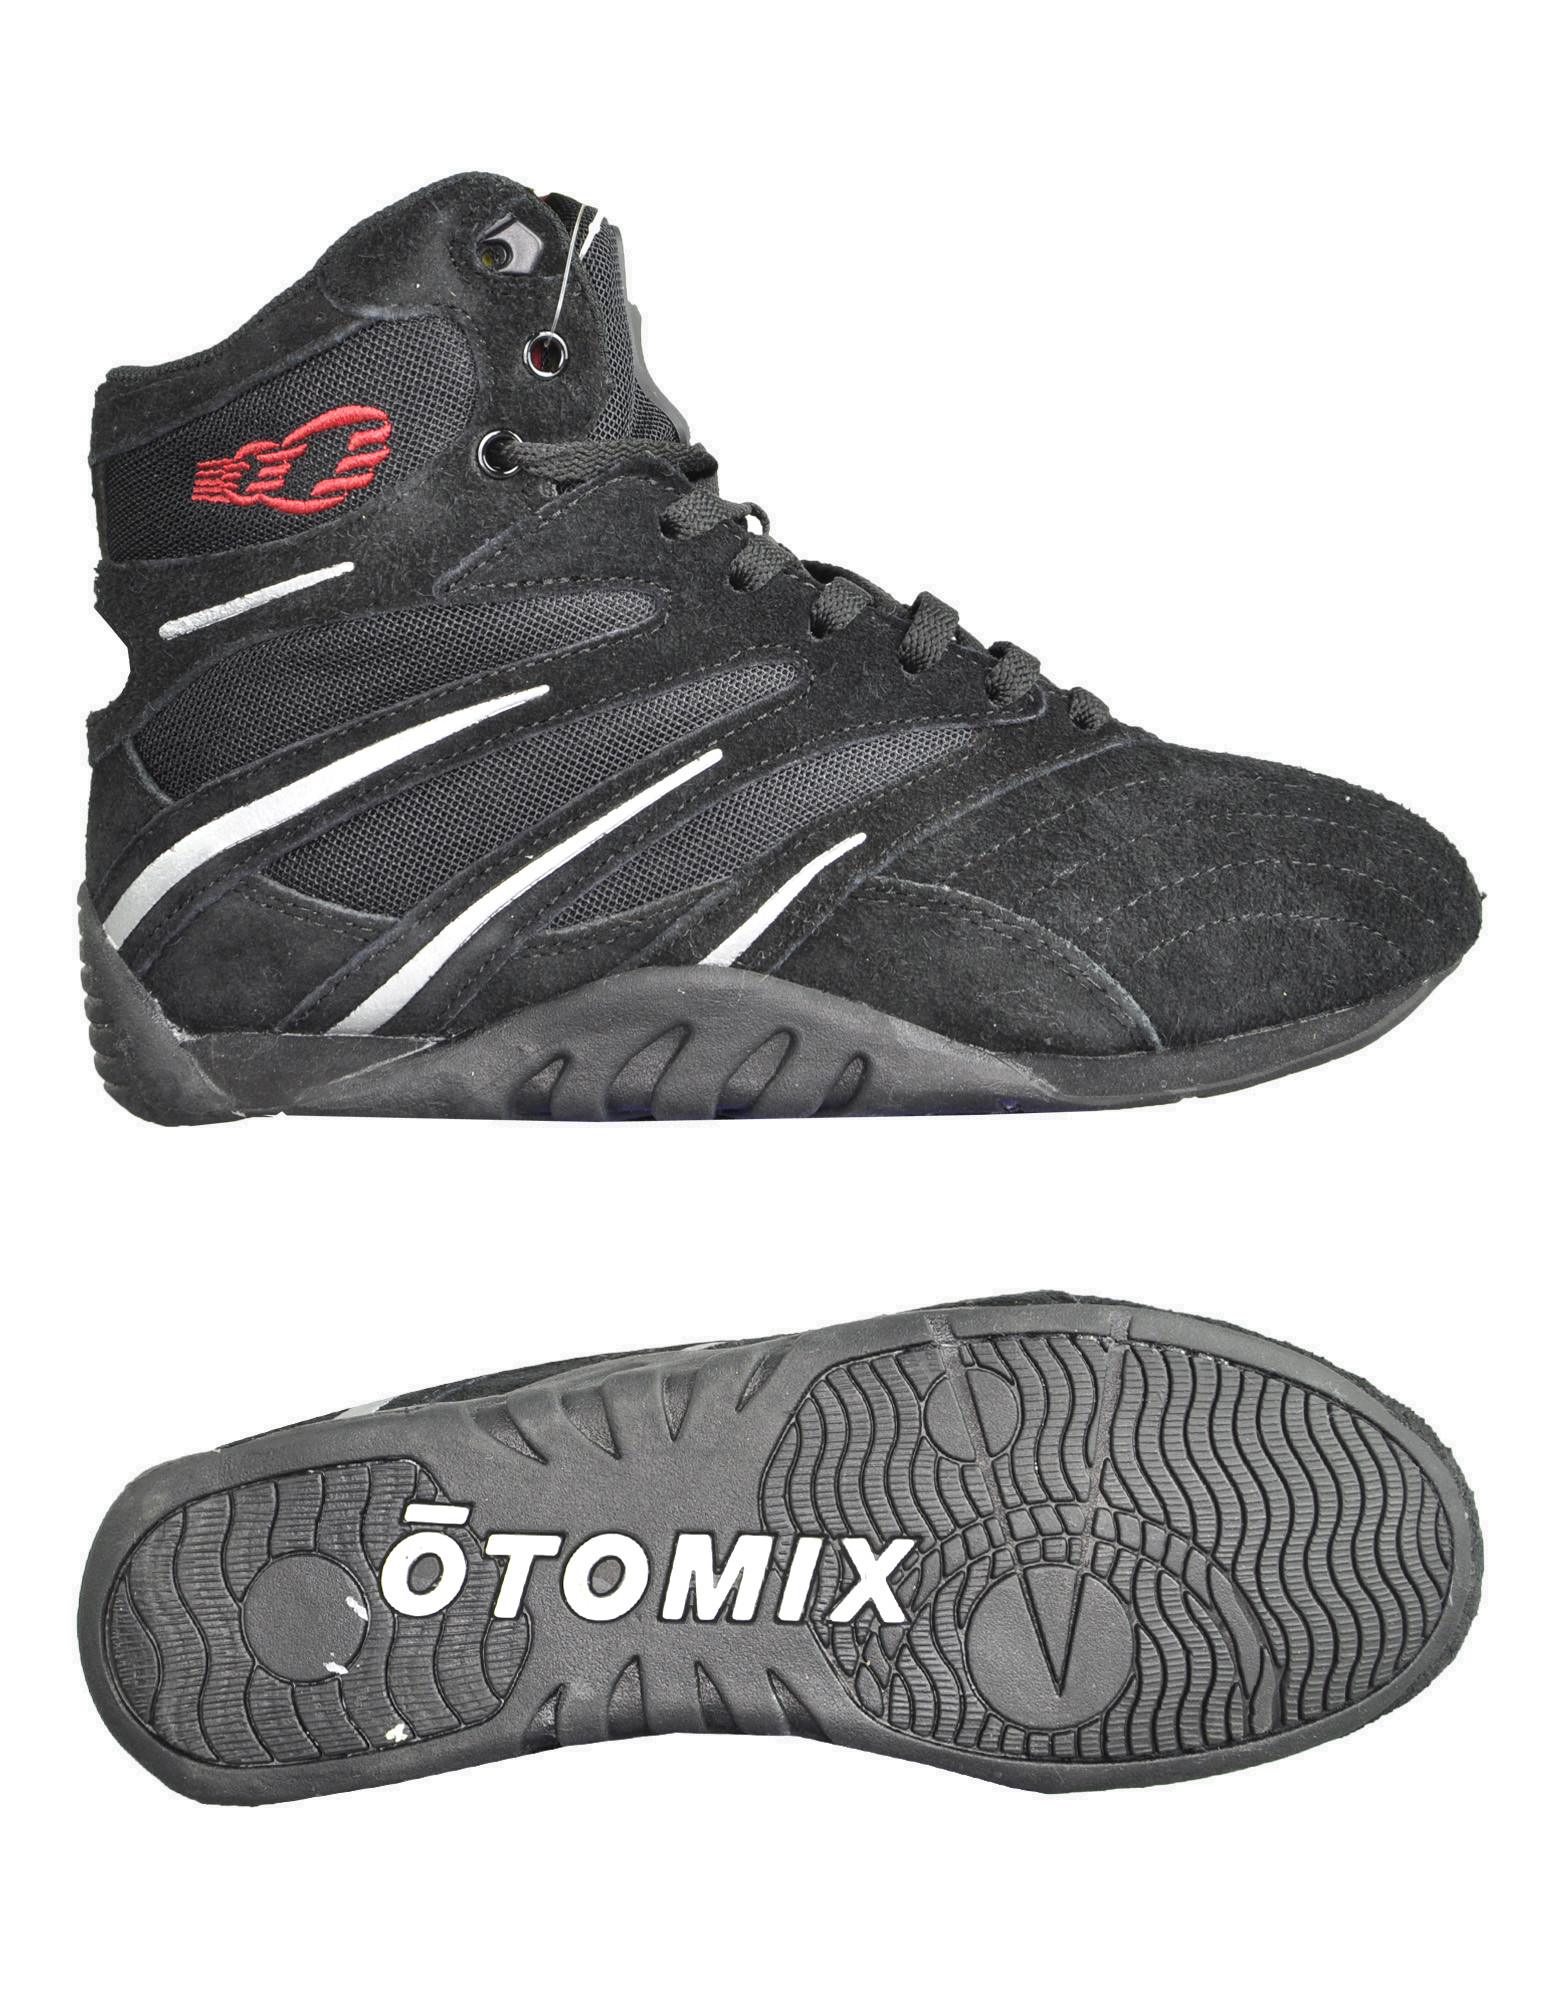 Extreme Trainer Pro by OTOMIX (colour: black)